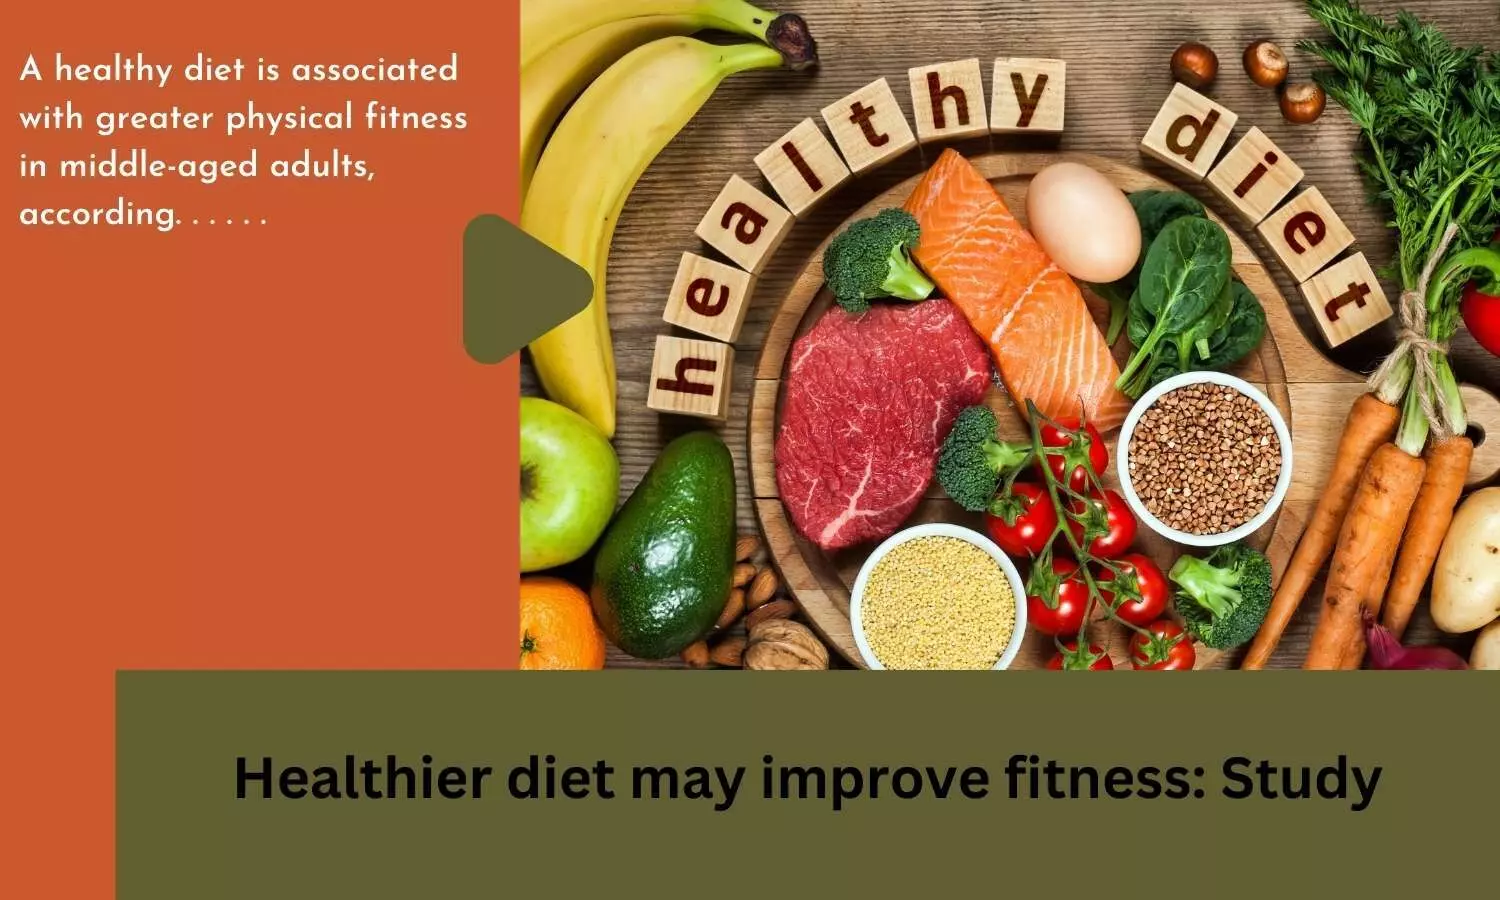 Healthier diet may improve fitness: Study